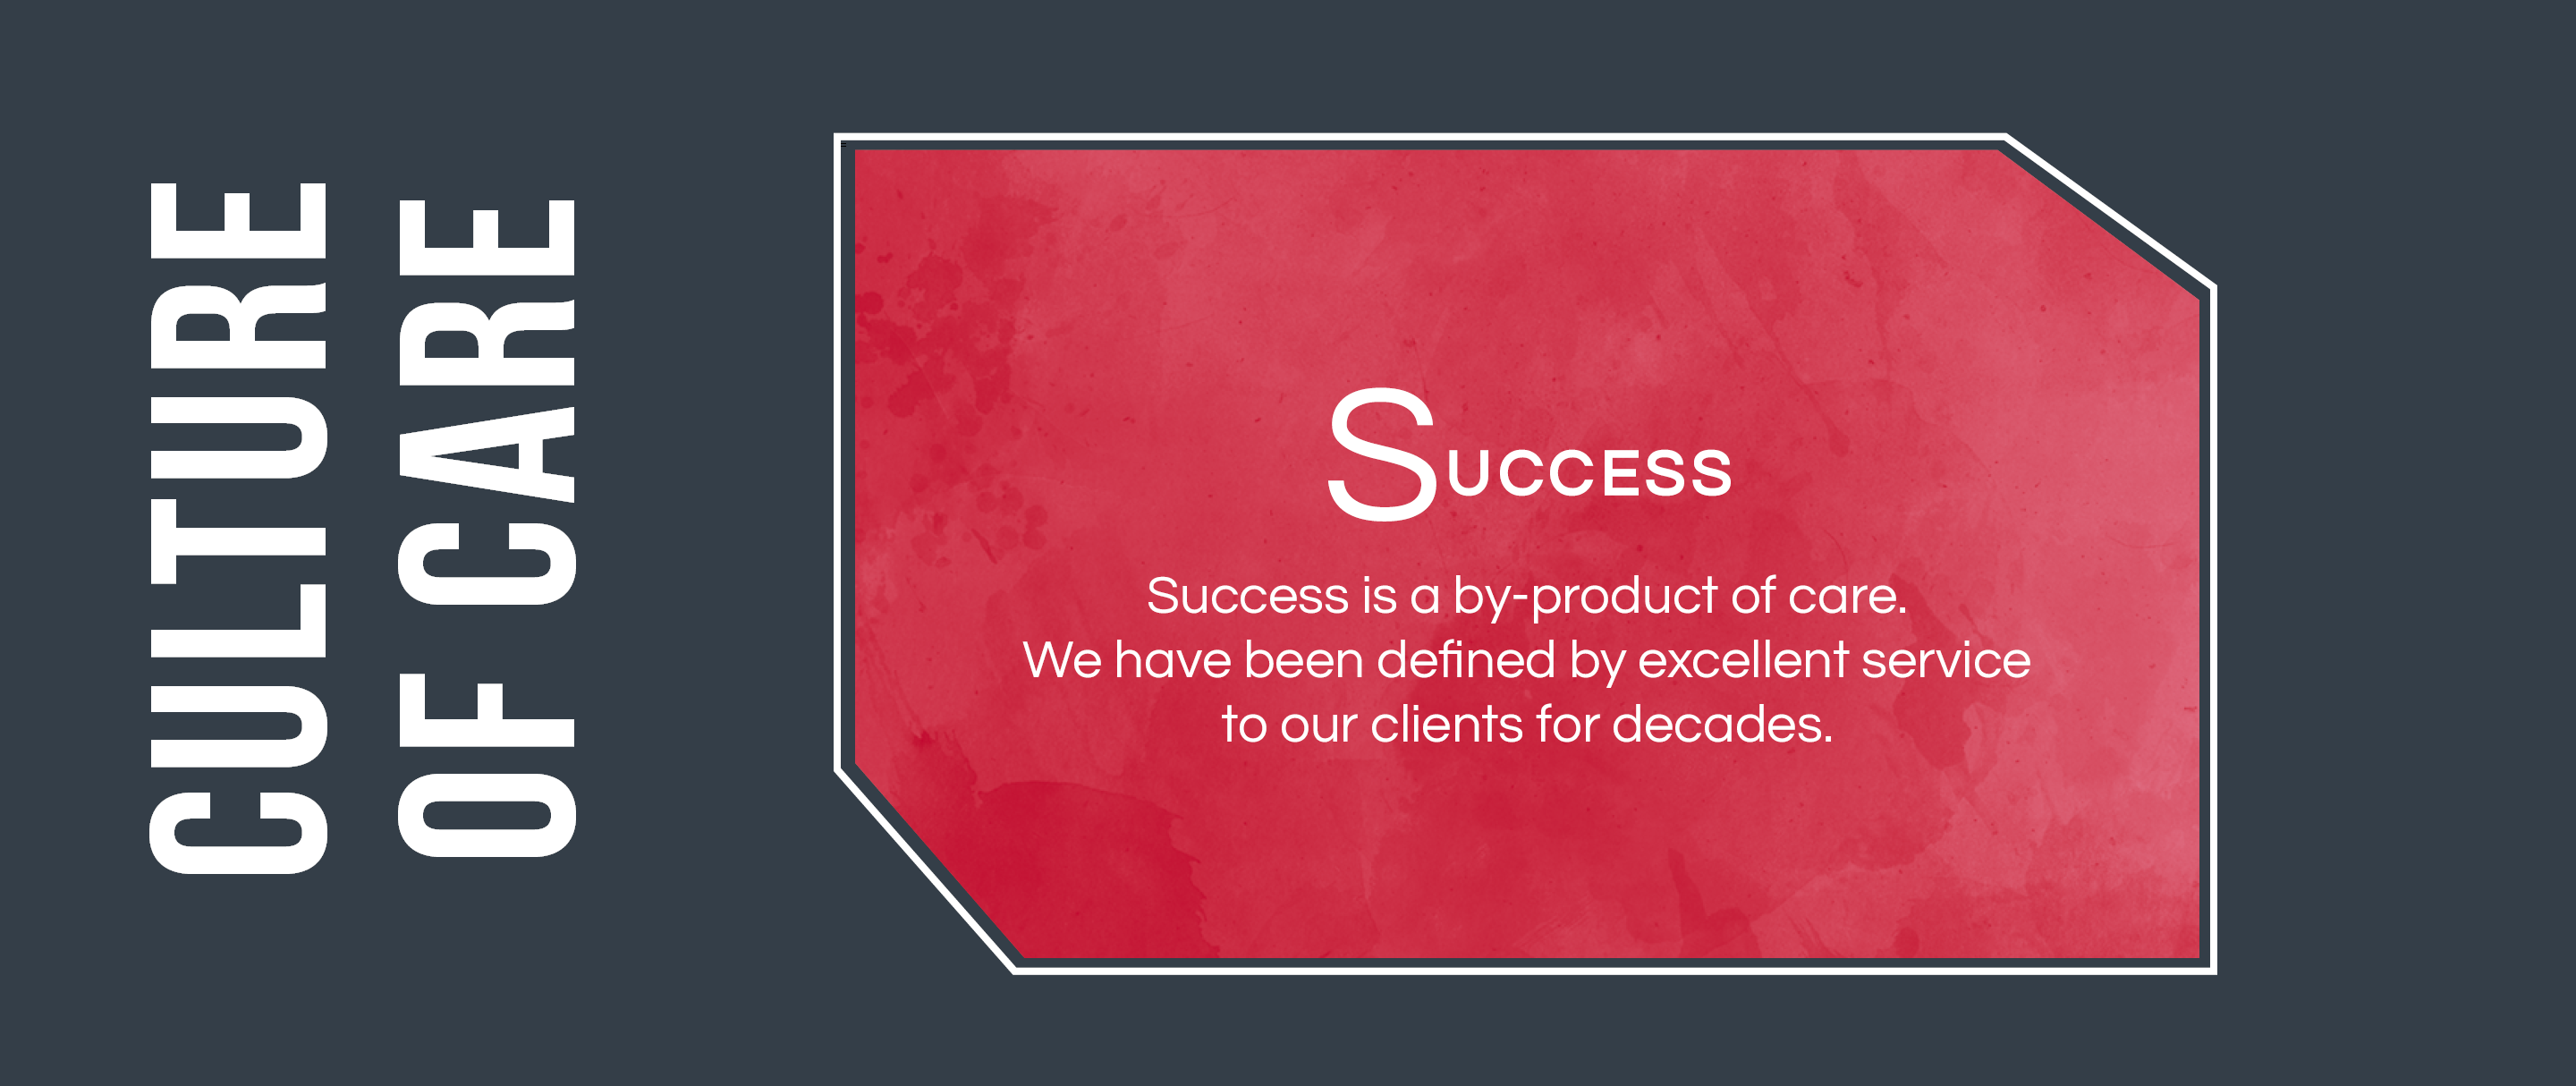 success is a by-product of care.